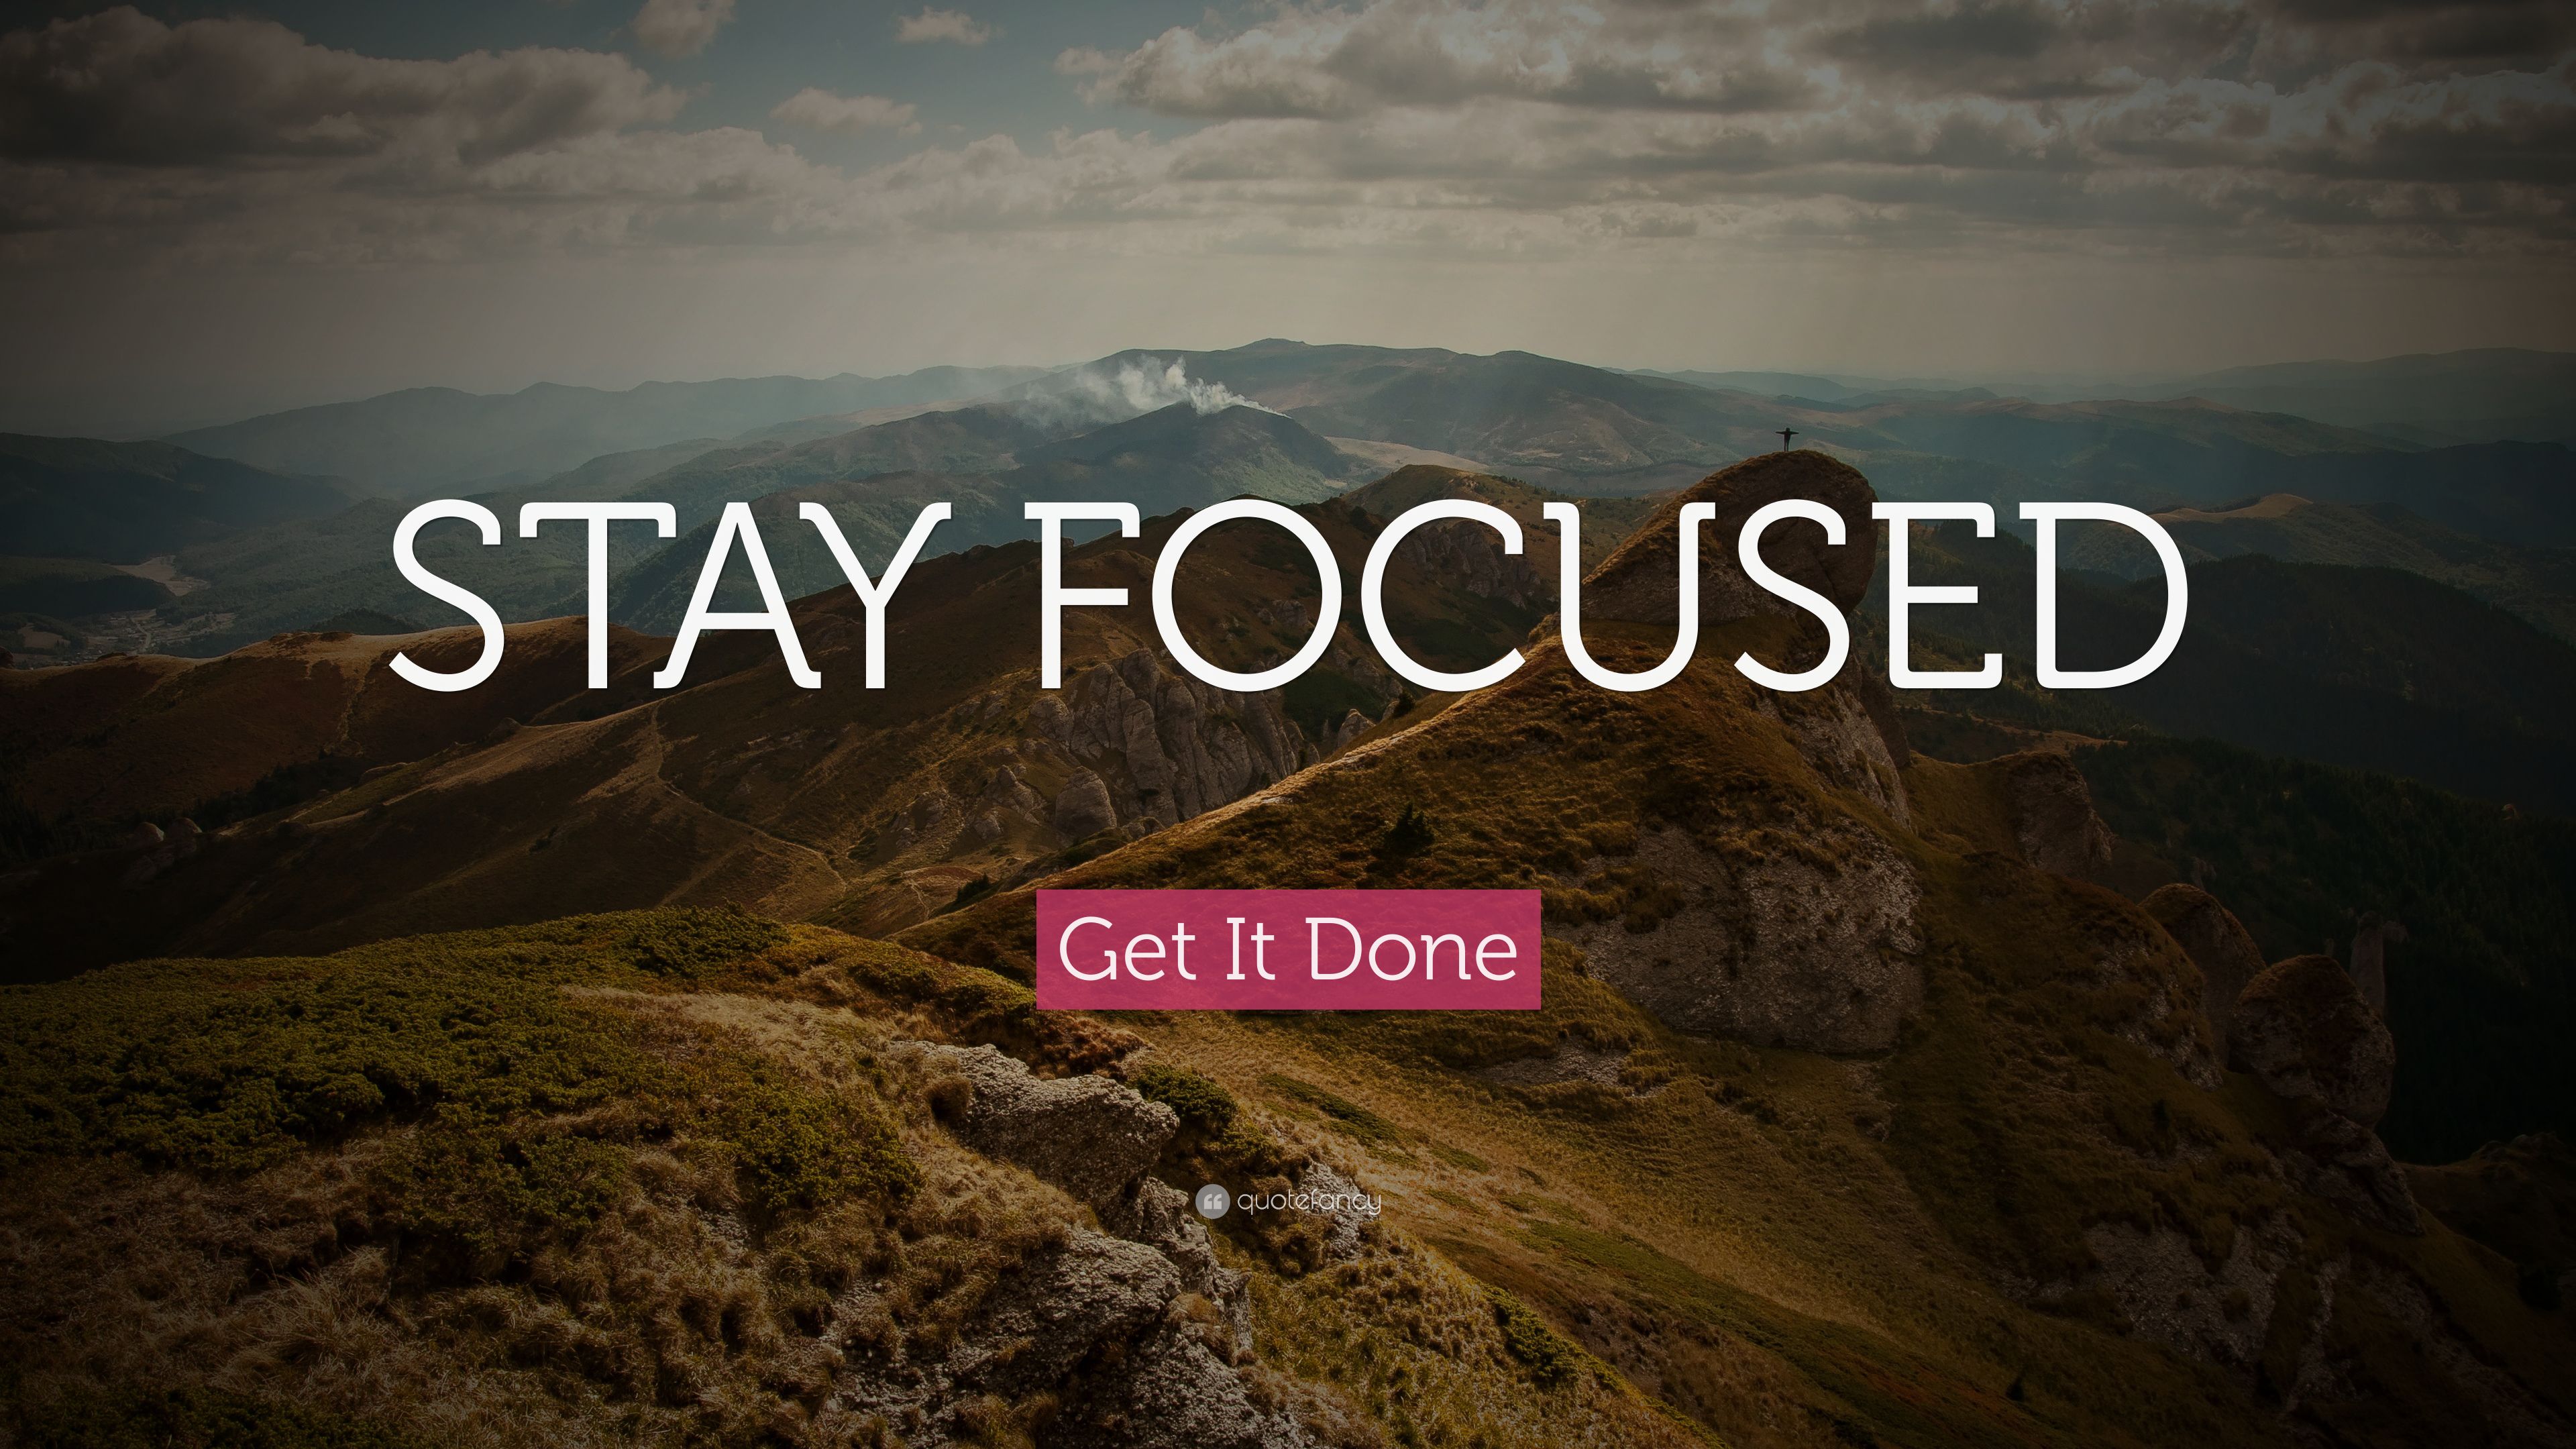 Get It Done Quote: "STAY FOCUSED" .